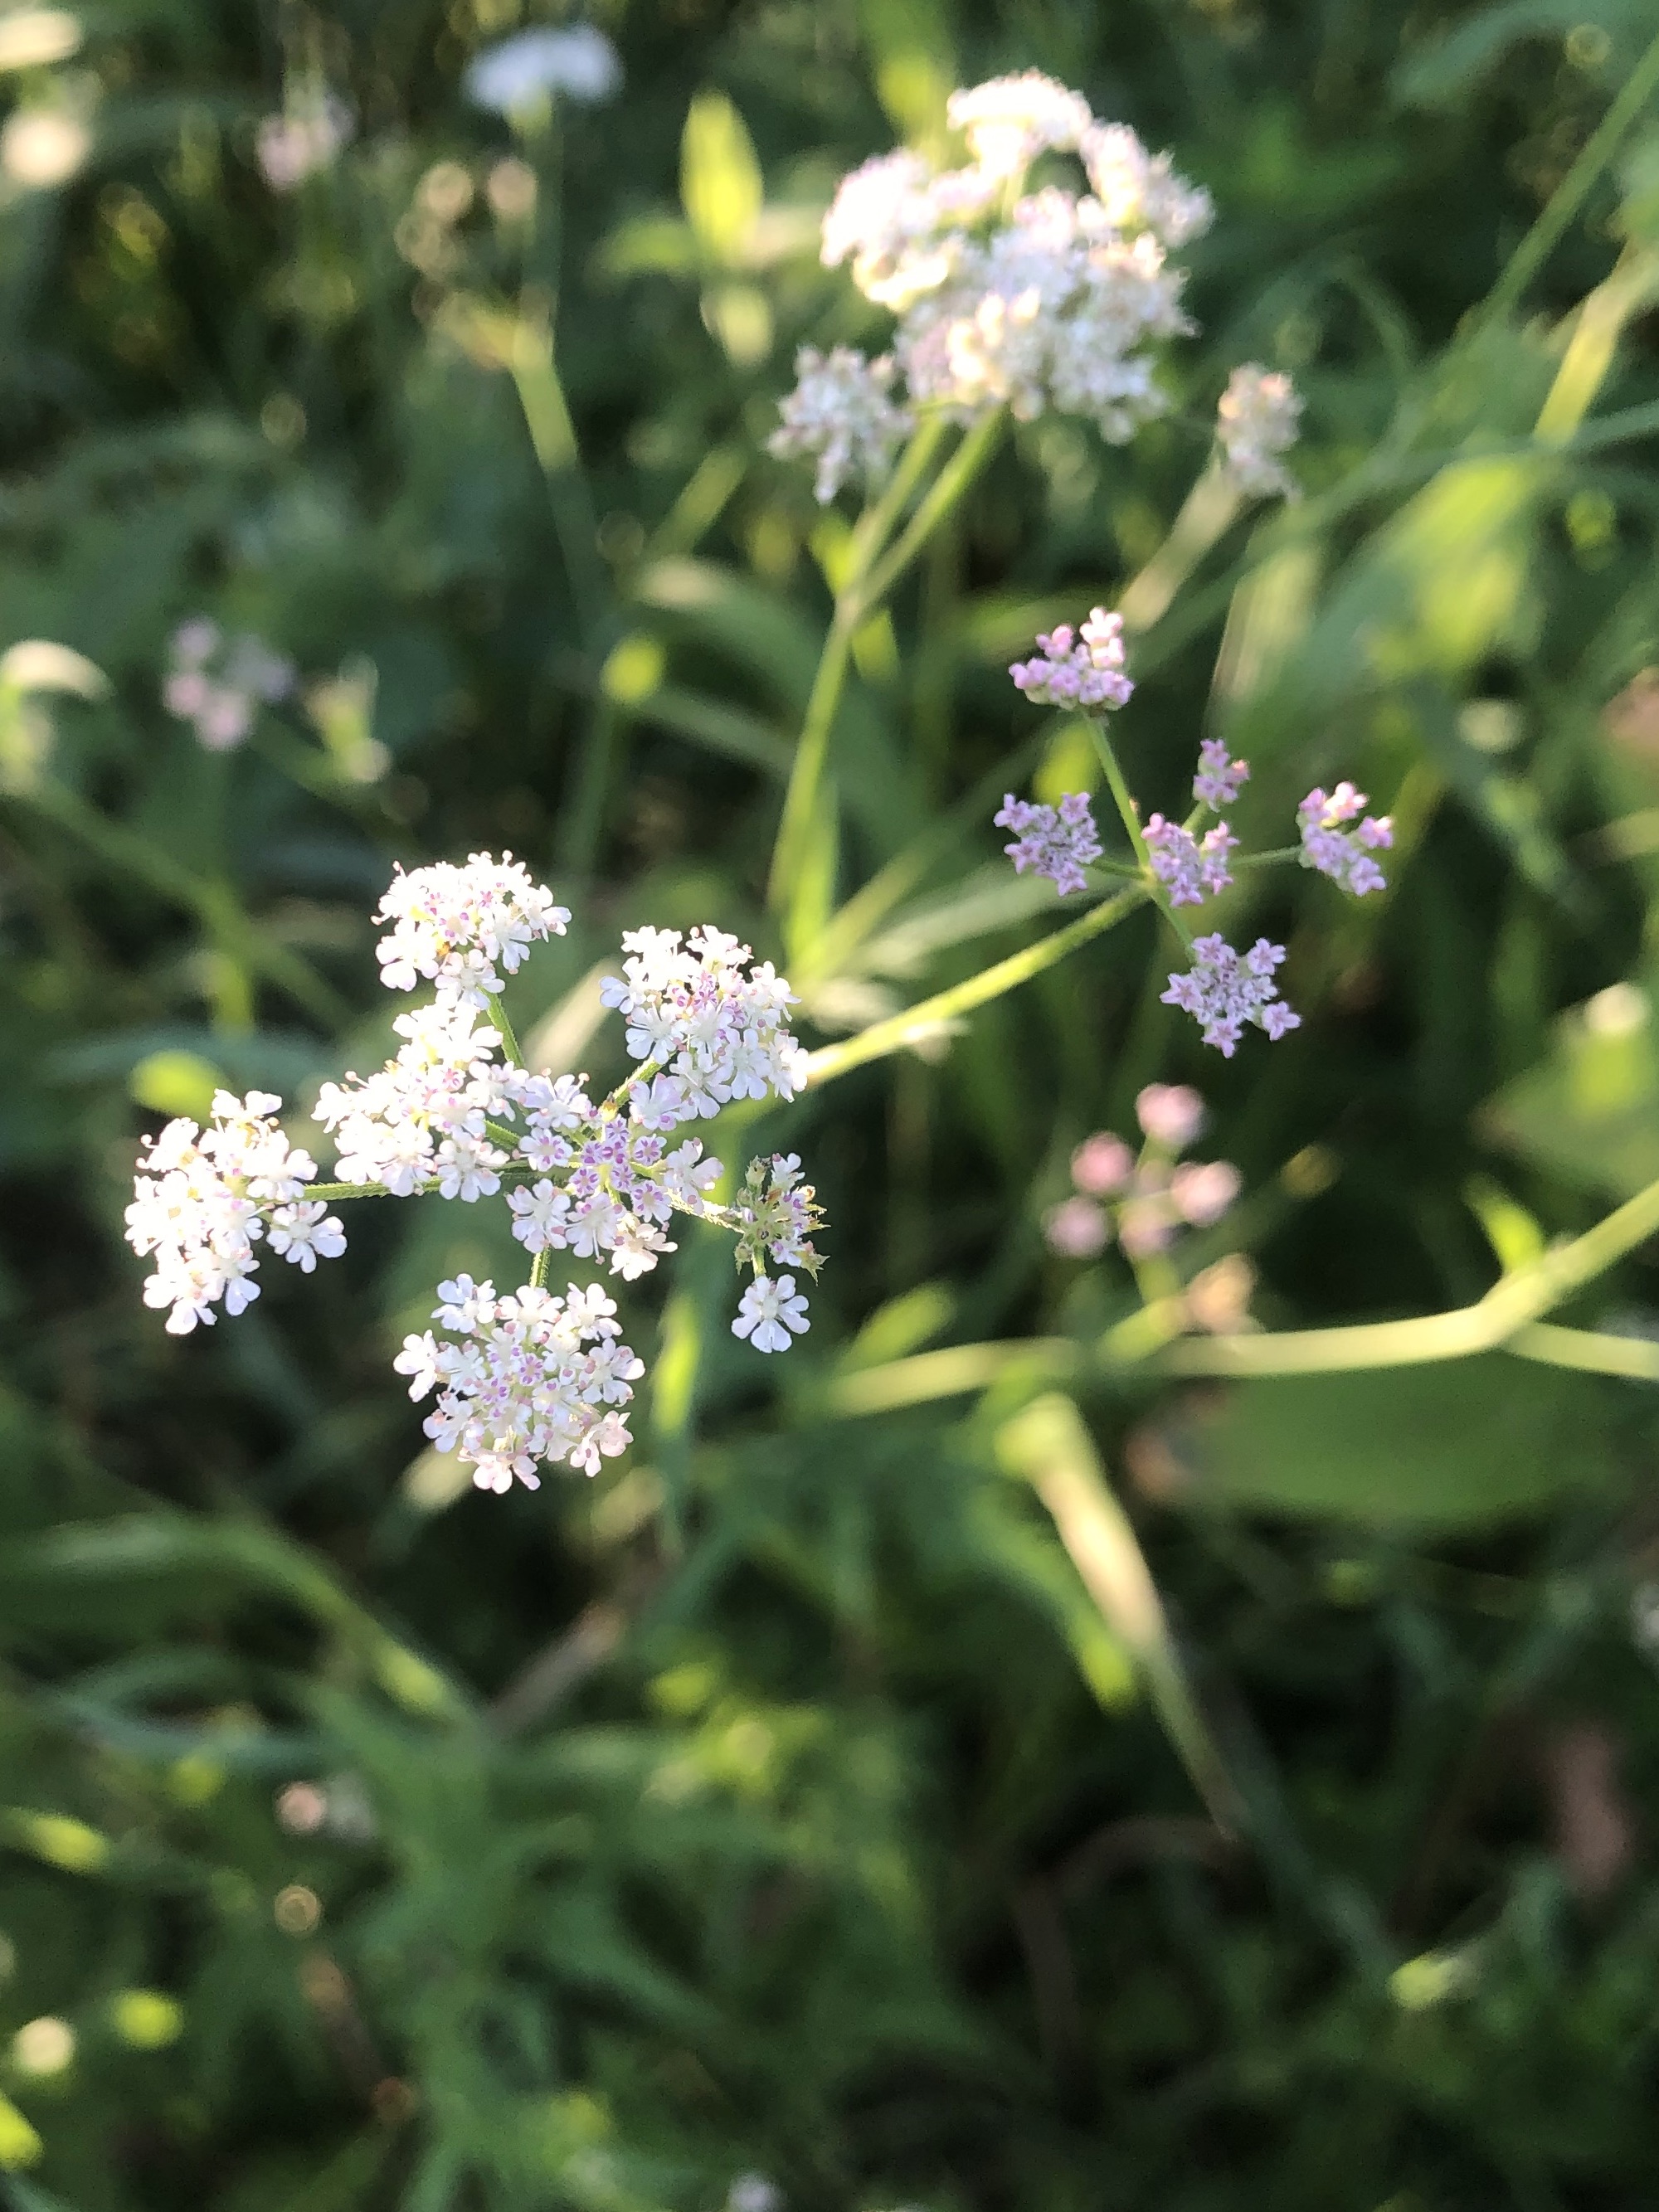 Hedge Parsley in Madison, Wisconsin on July 19, 2022.